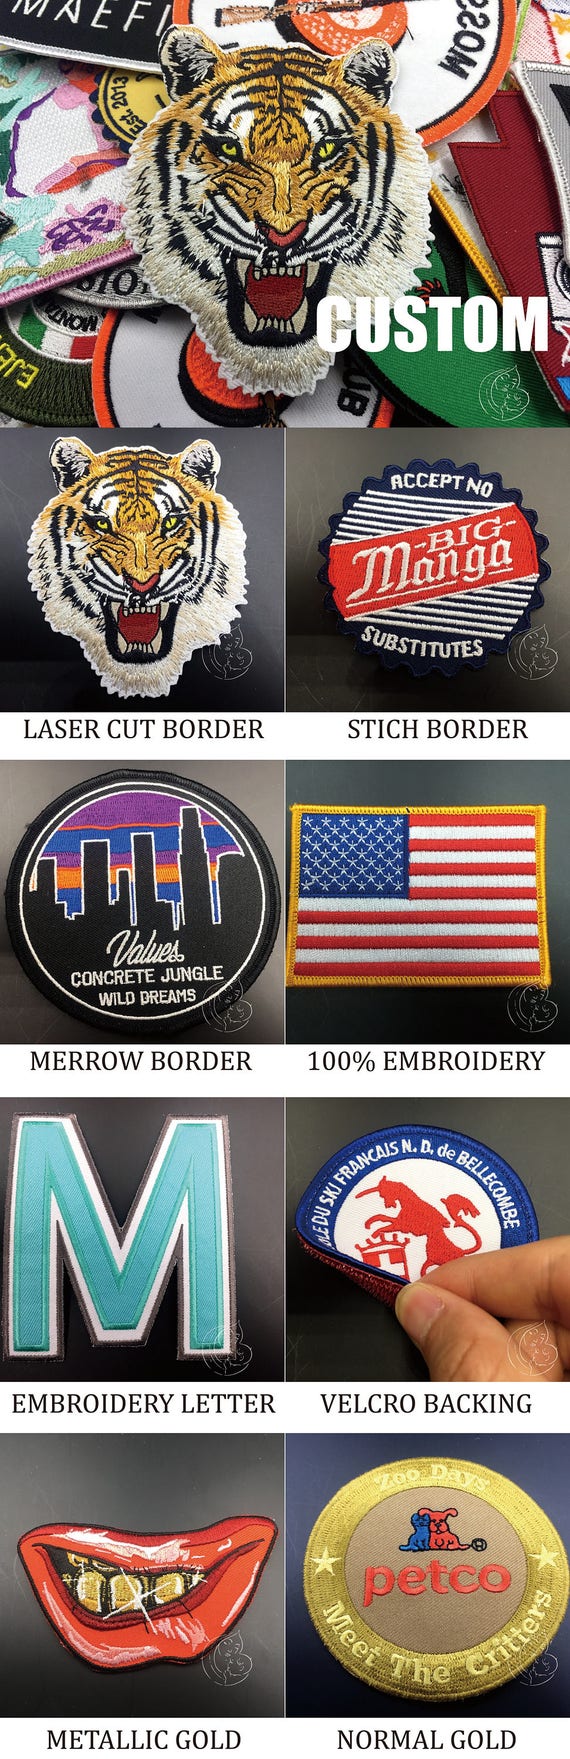 Custom Motorcycle Patches for Vest, Custom Embroidered Motorcycle